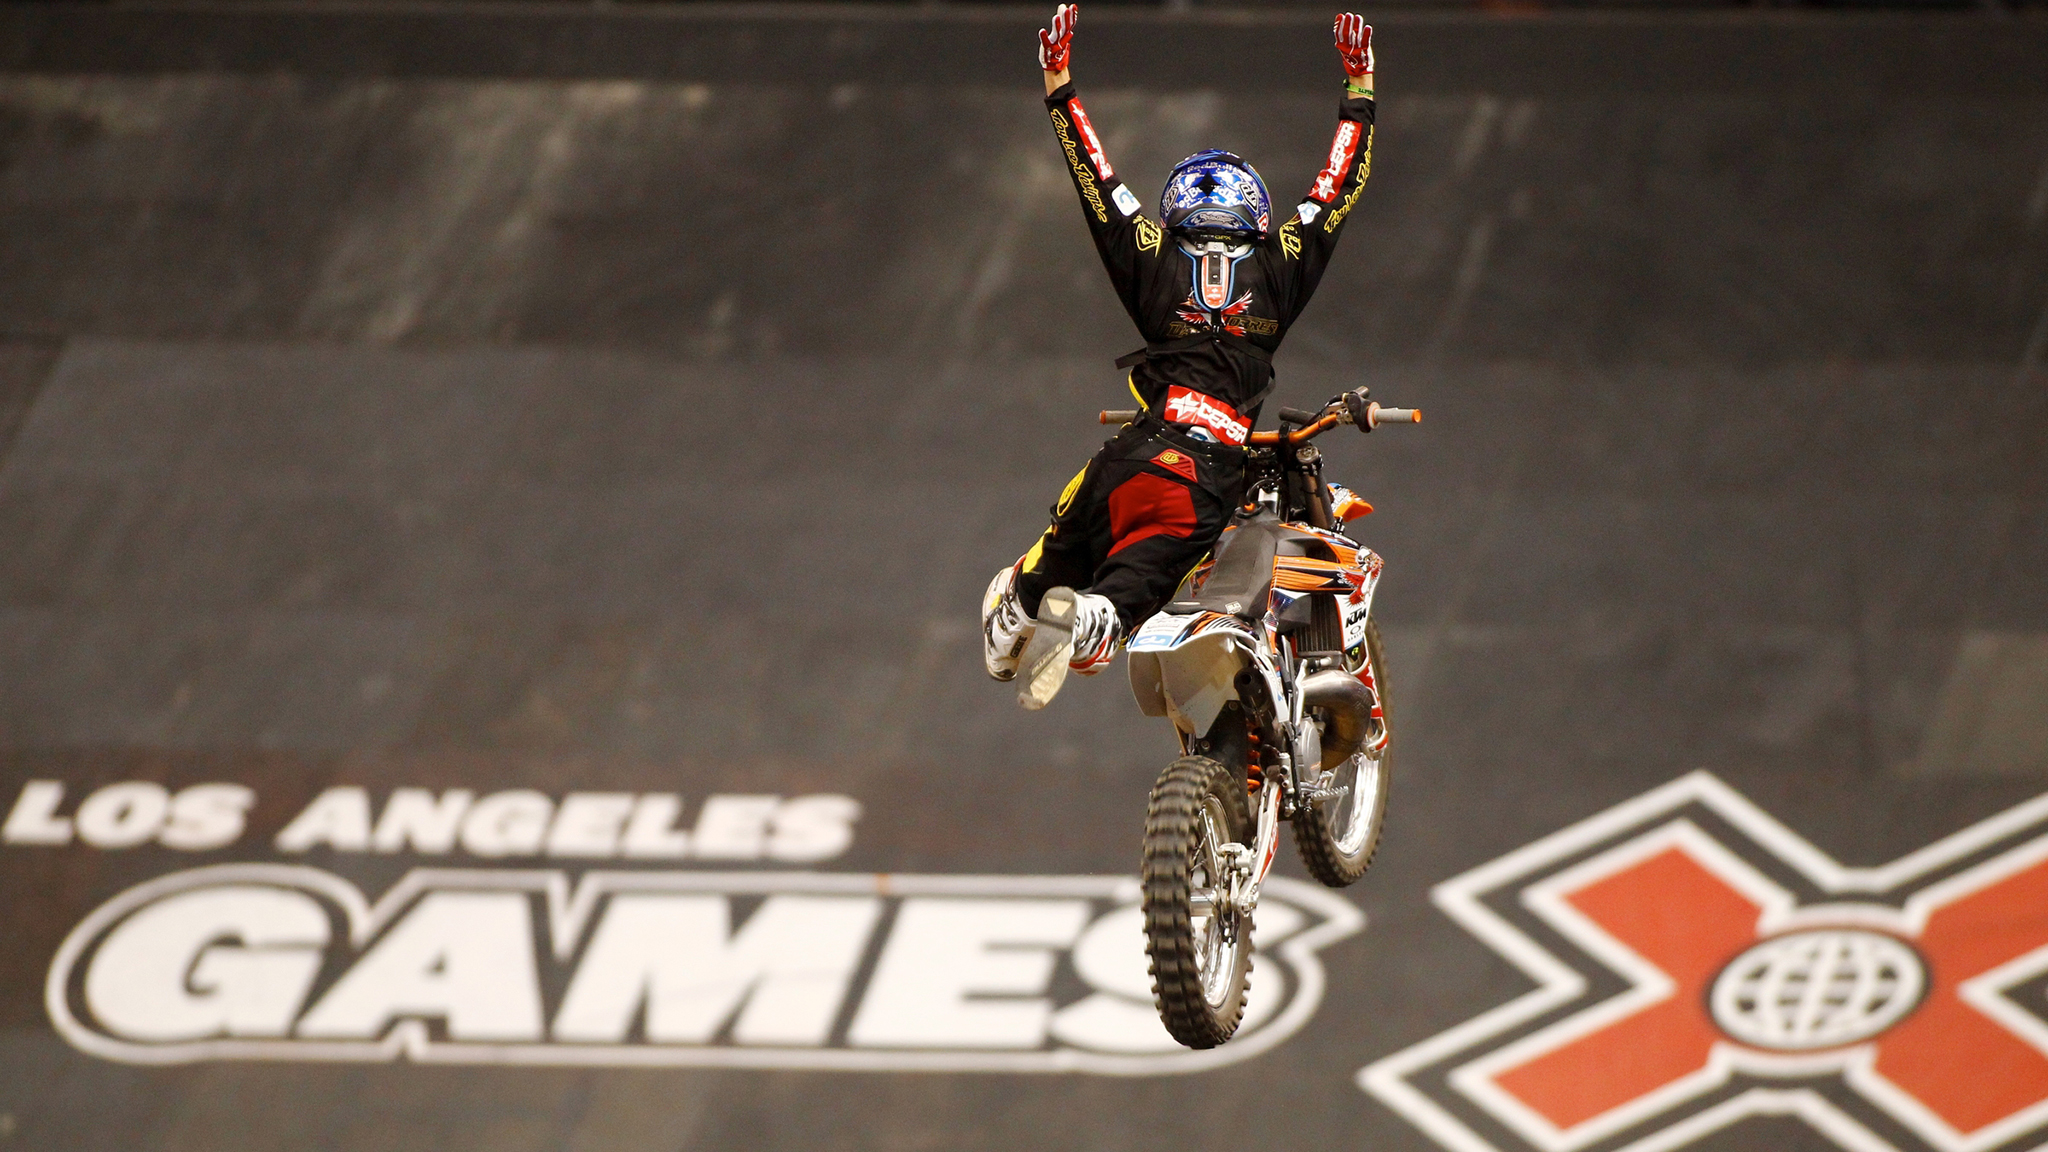 X Games potential host cities for 2014 X Games